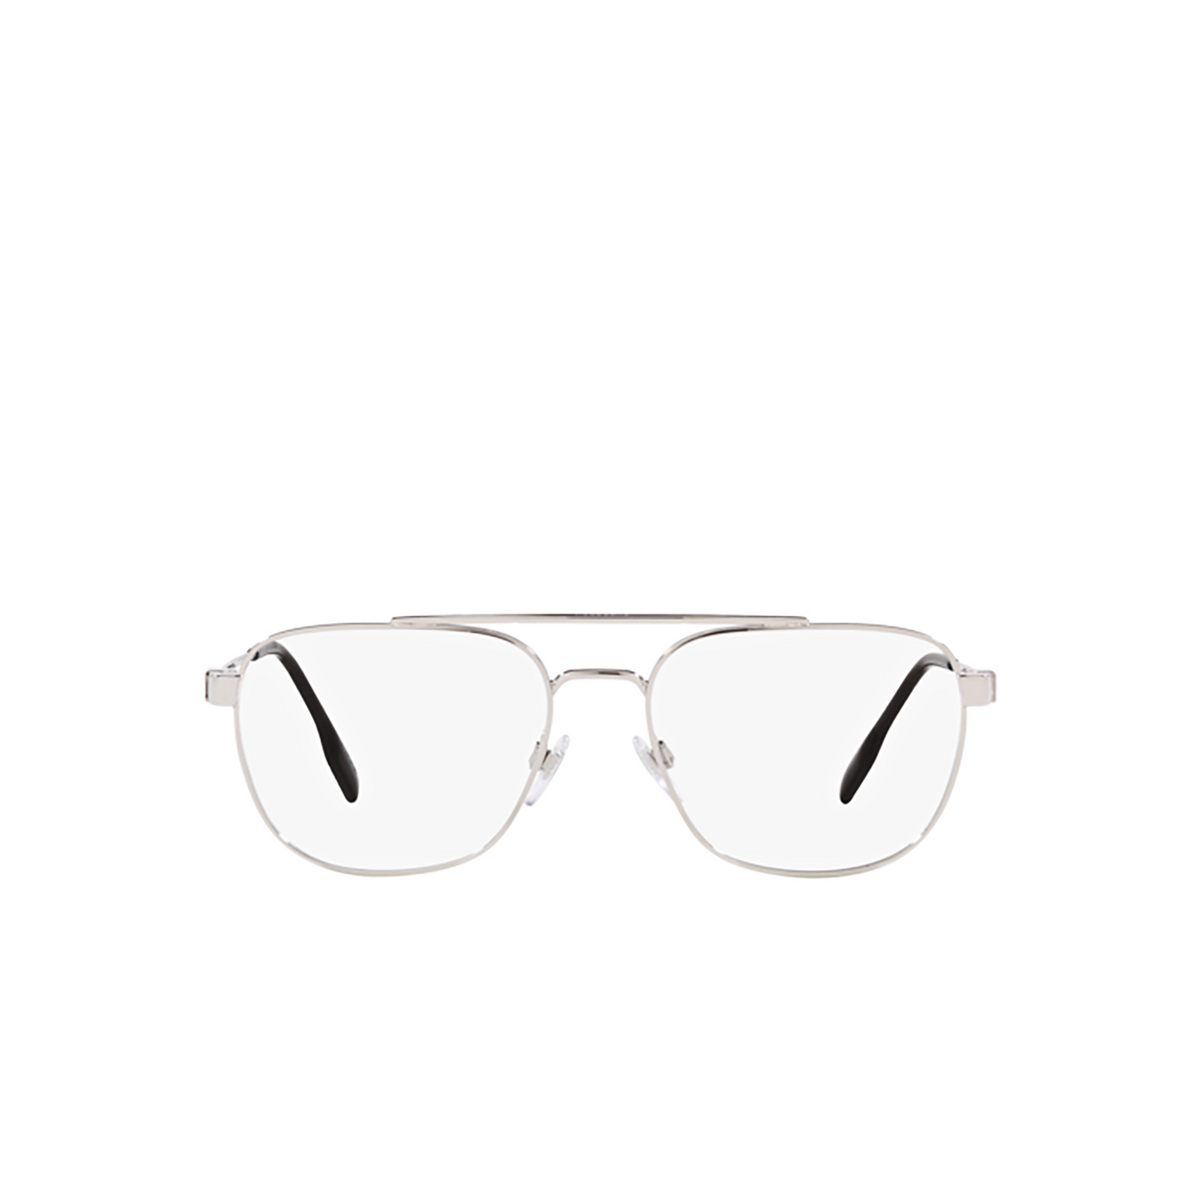 Burberry MICHAEL Eyeglasses 1005 Silver - front view